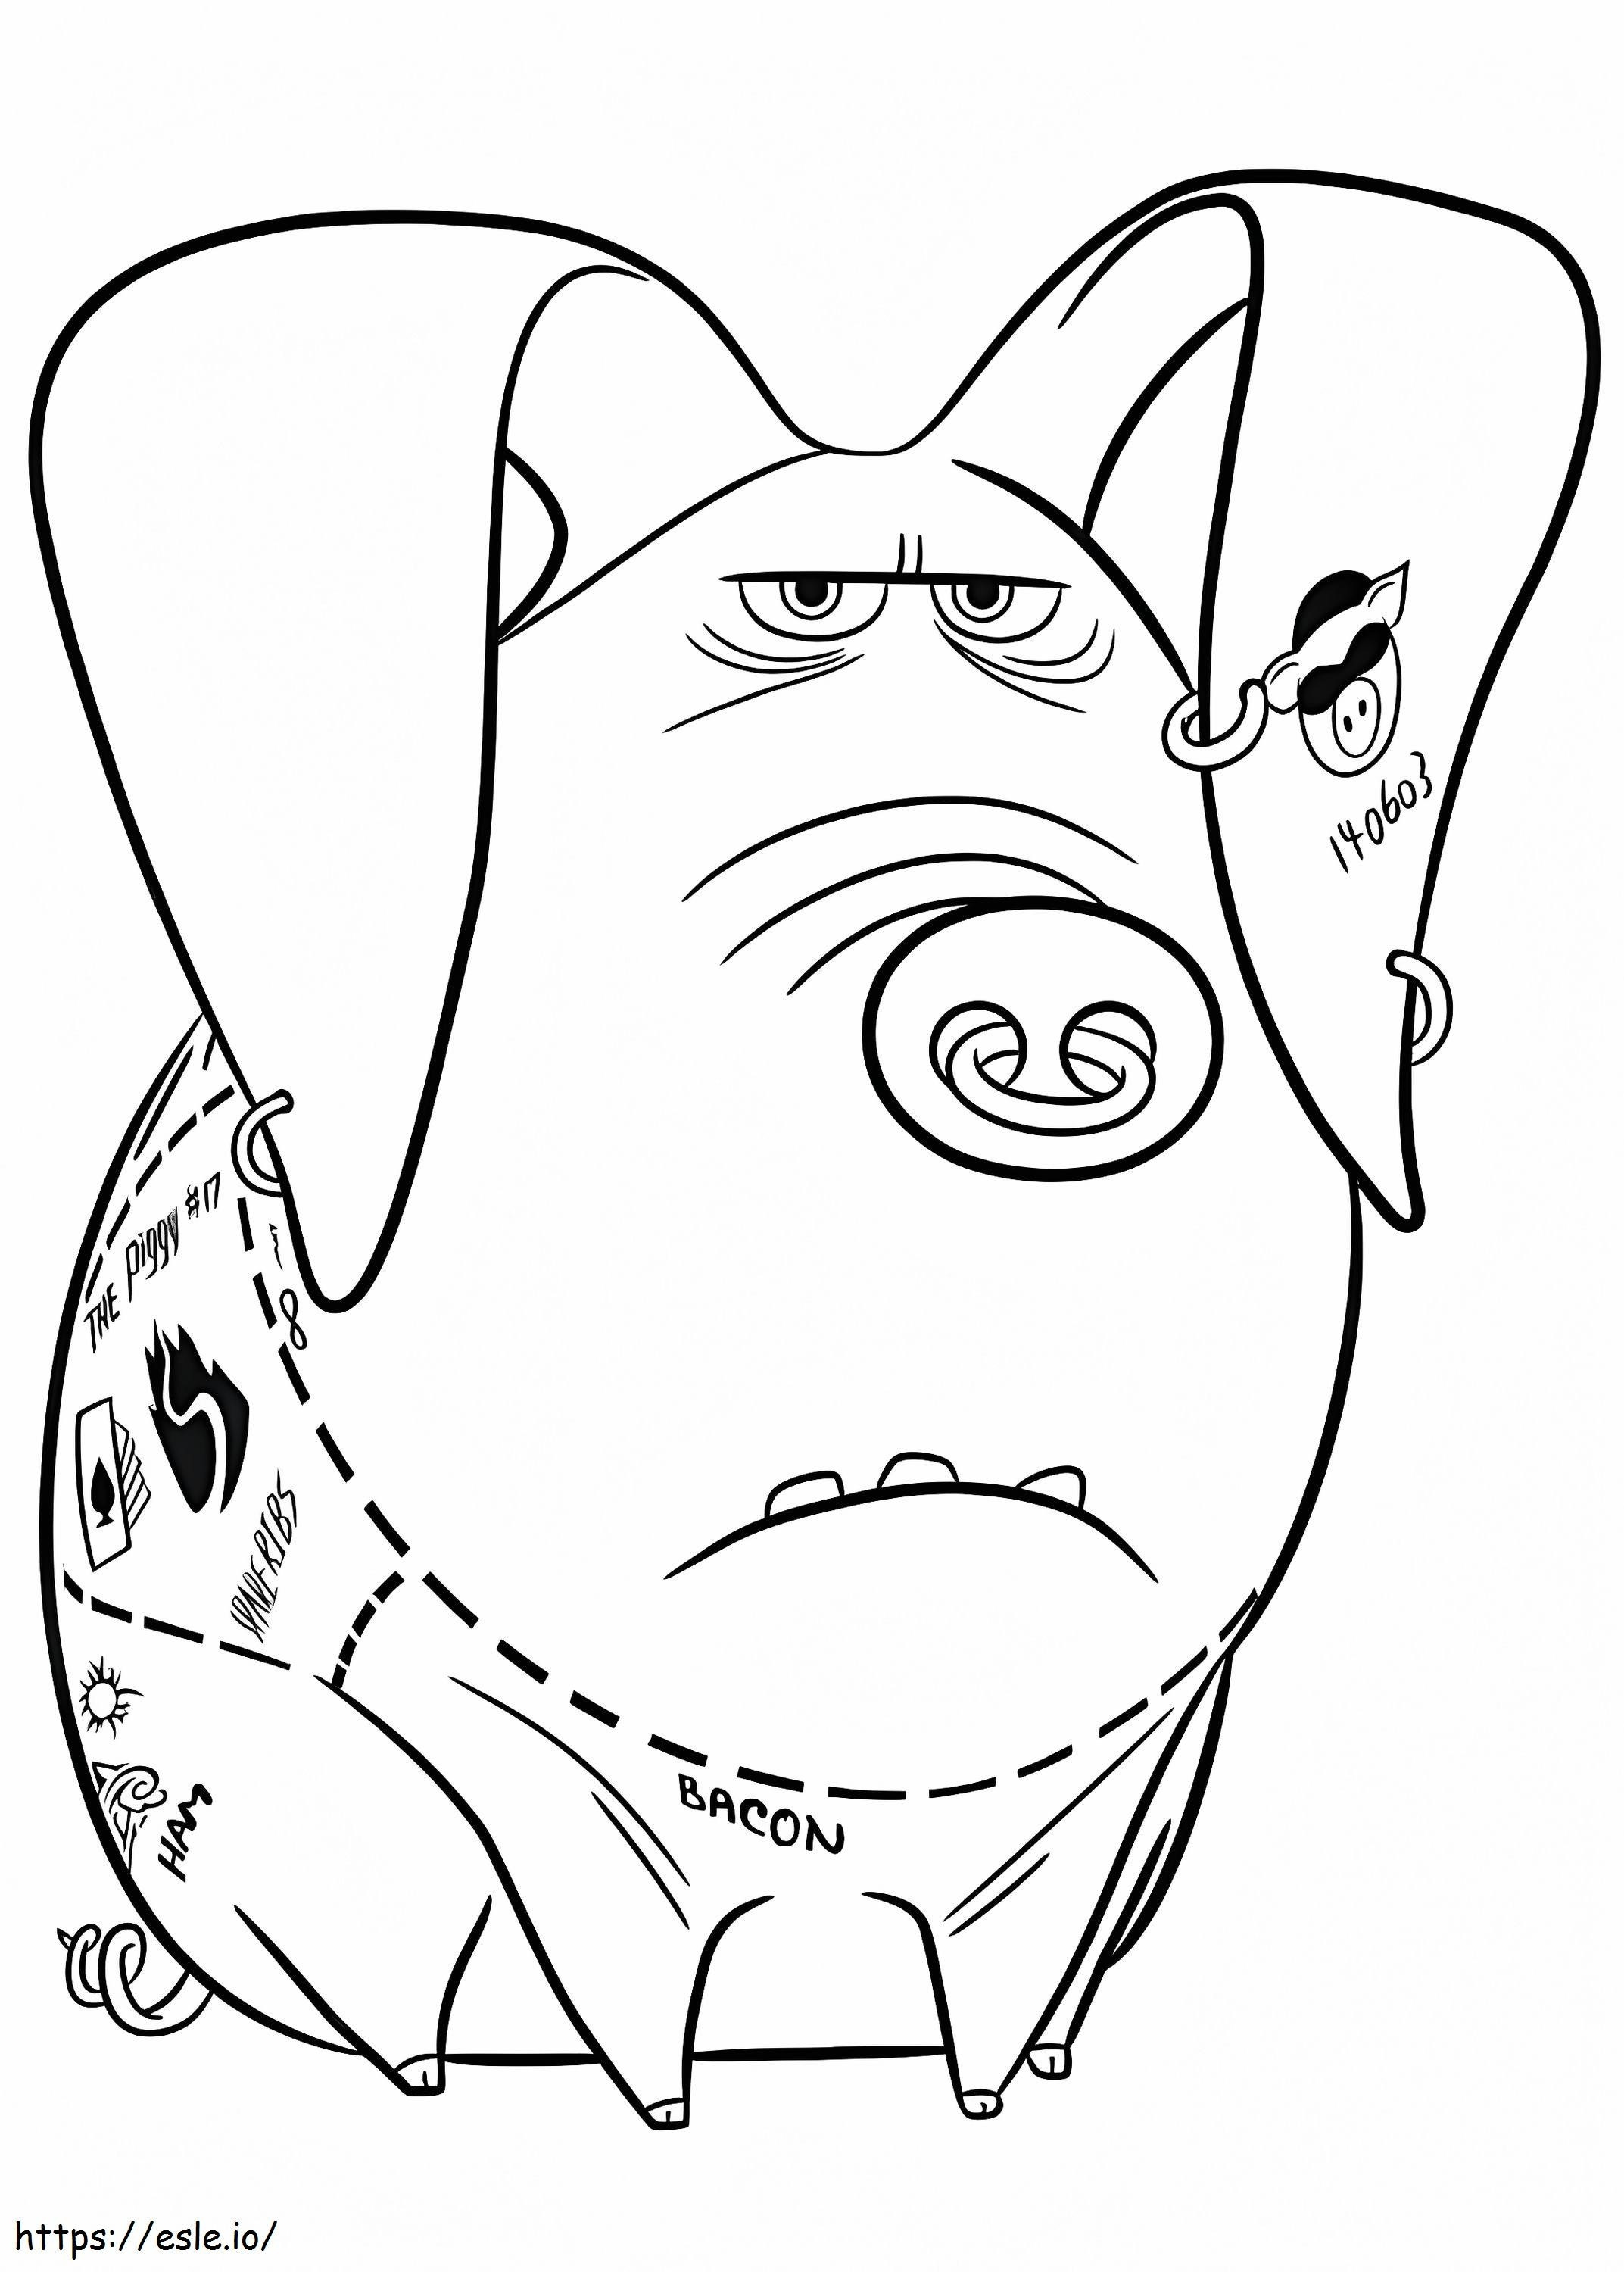 Funny Tattooed Pig coloring page